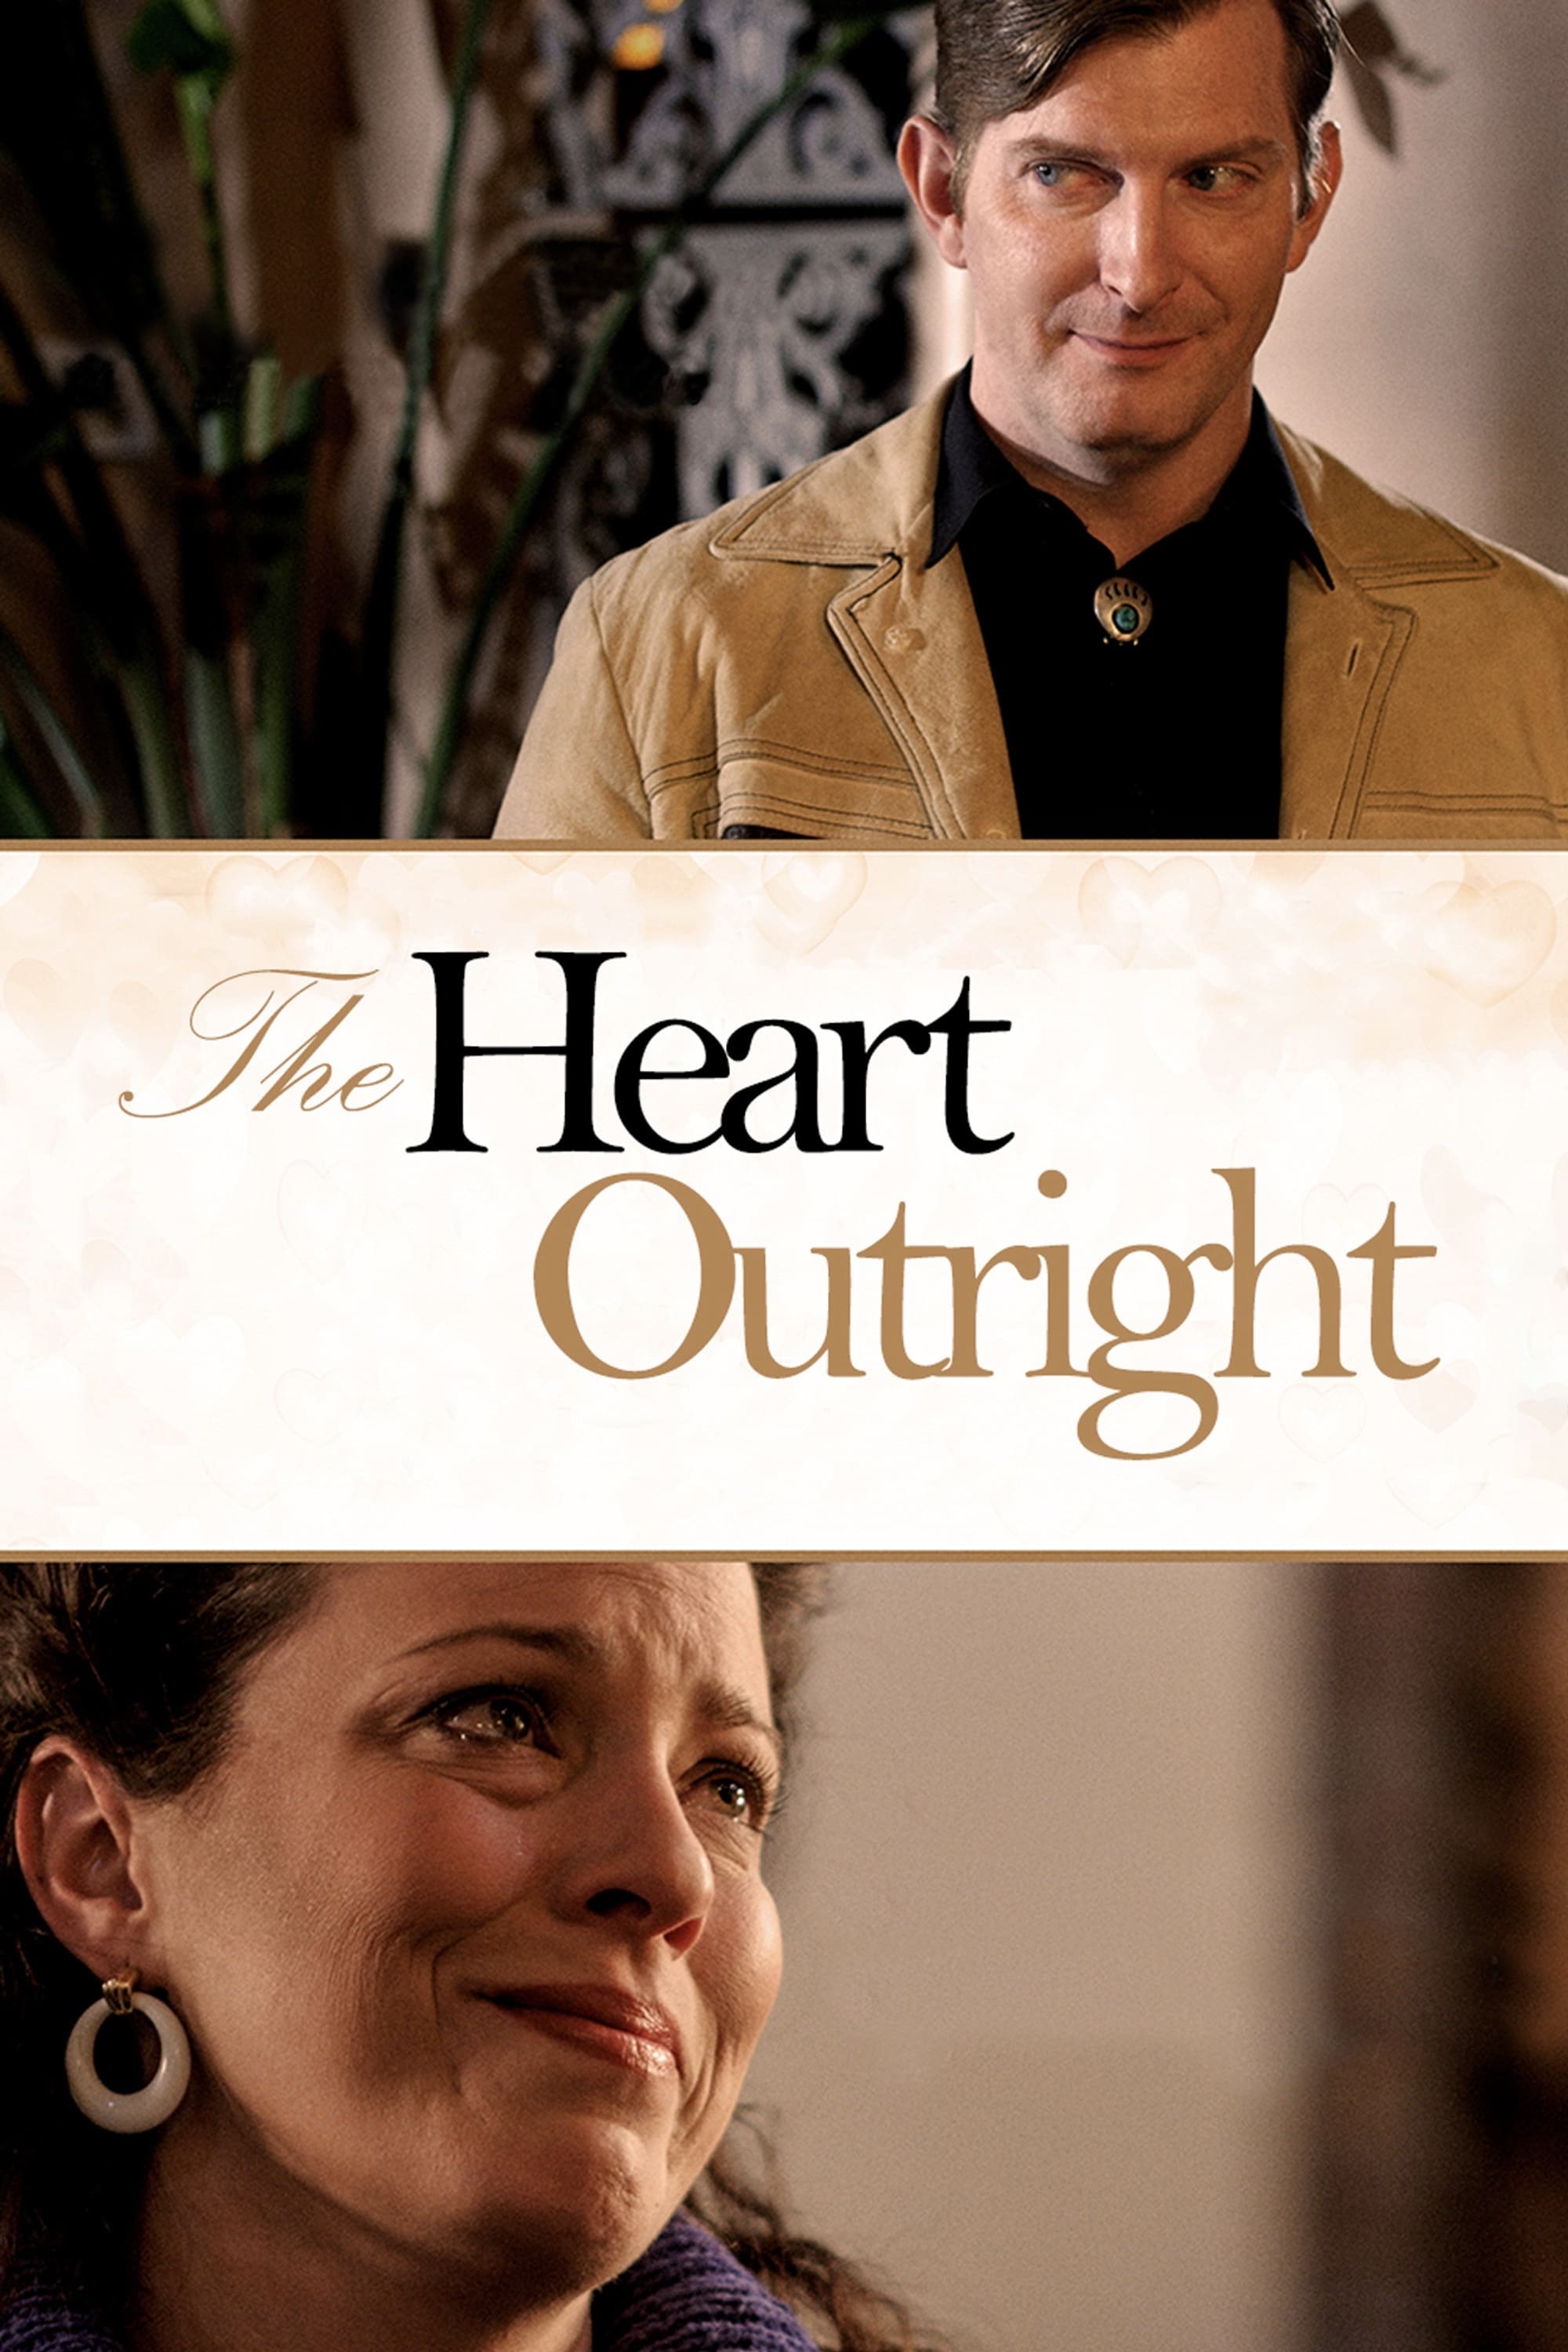 The Heart Outright